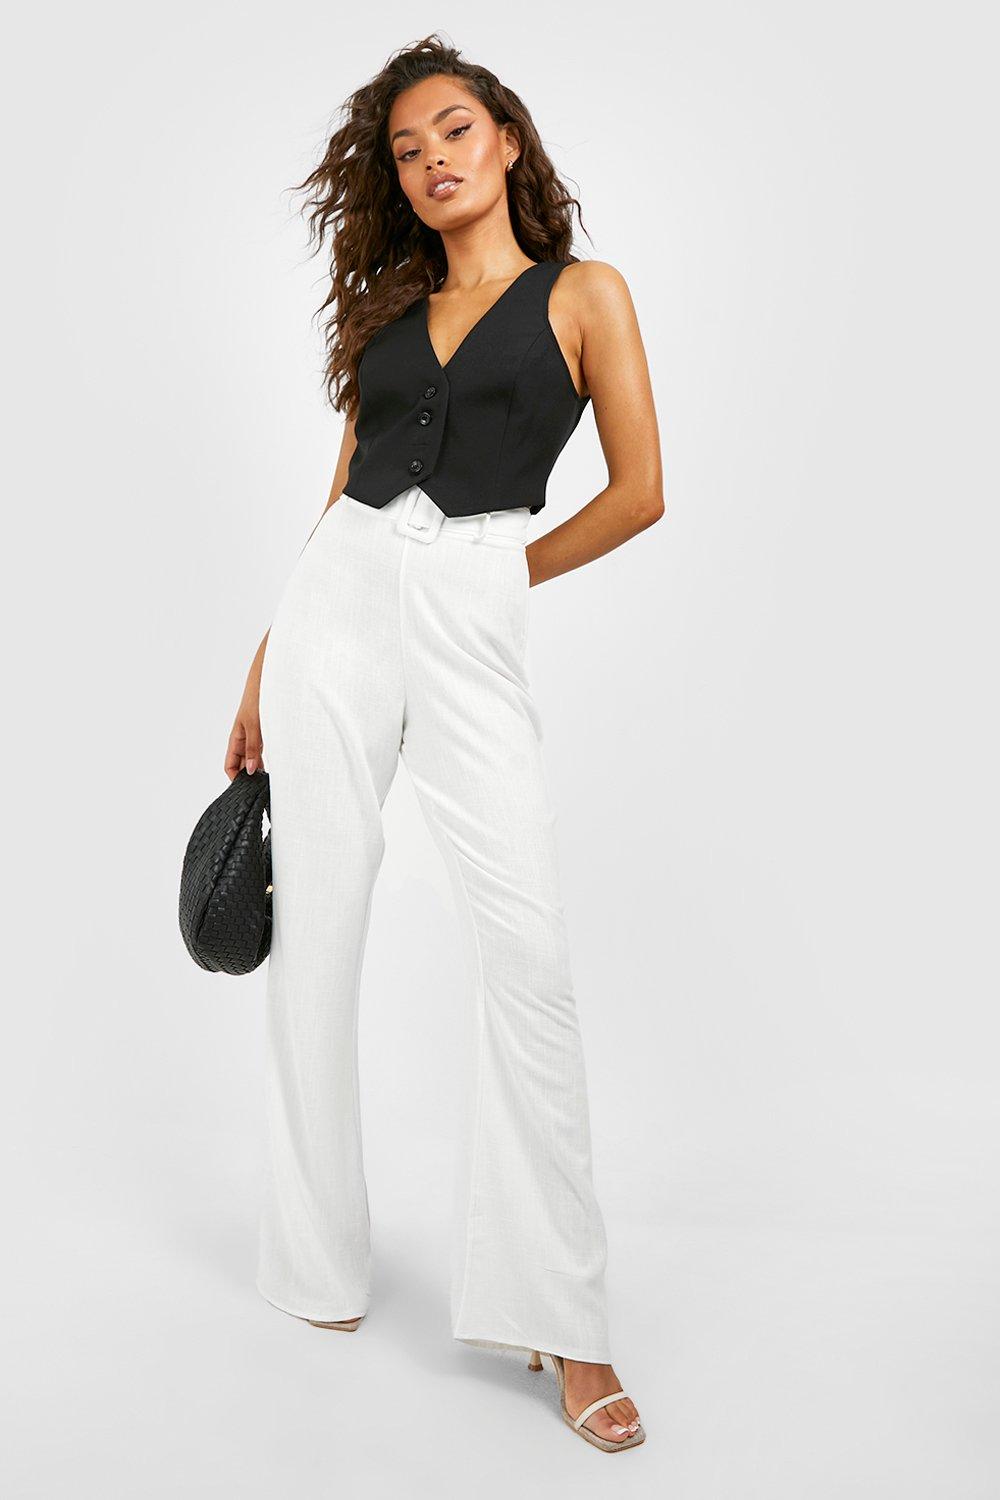 White Belted Trousers by 3.1 Phillip Lim on Sale